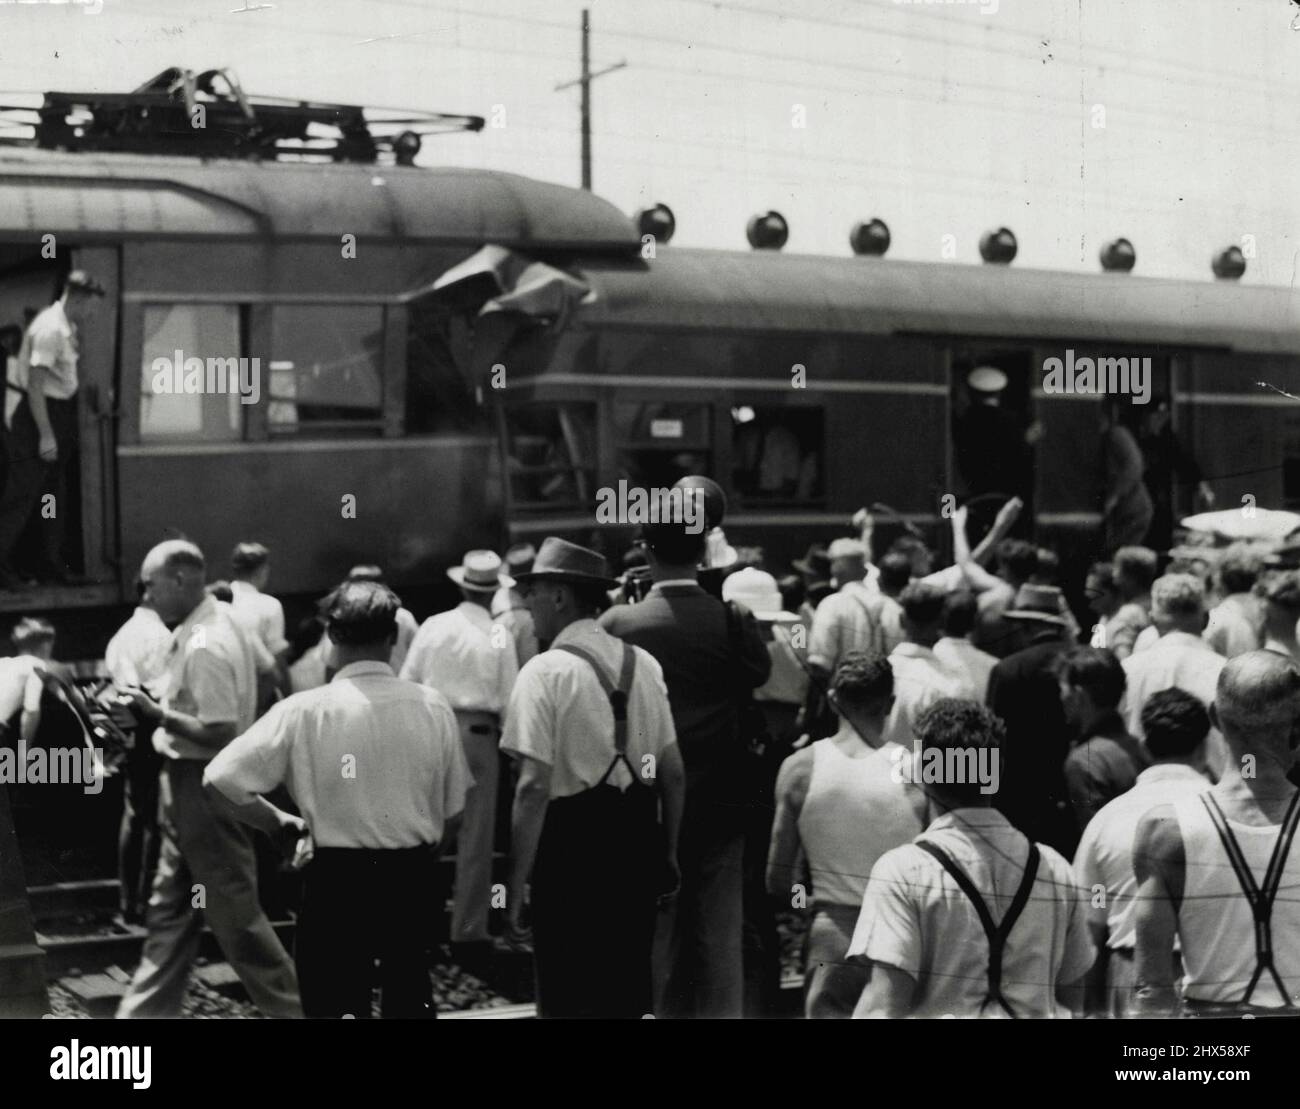 Two carriages telescoped in the smash. December 19, 1953. Stock Photo